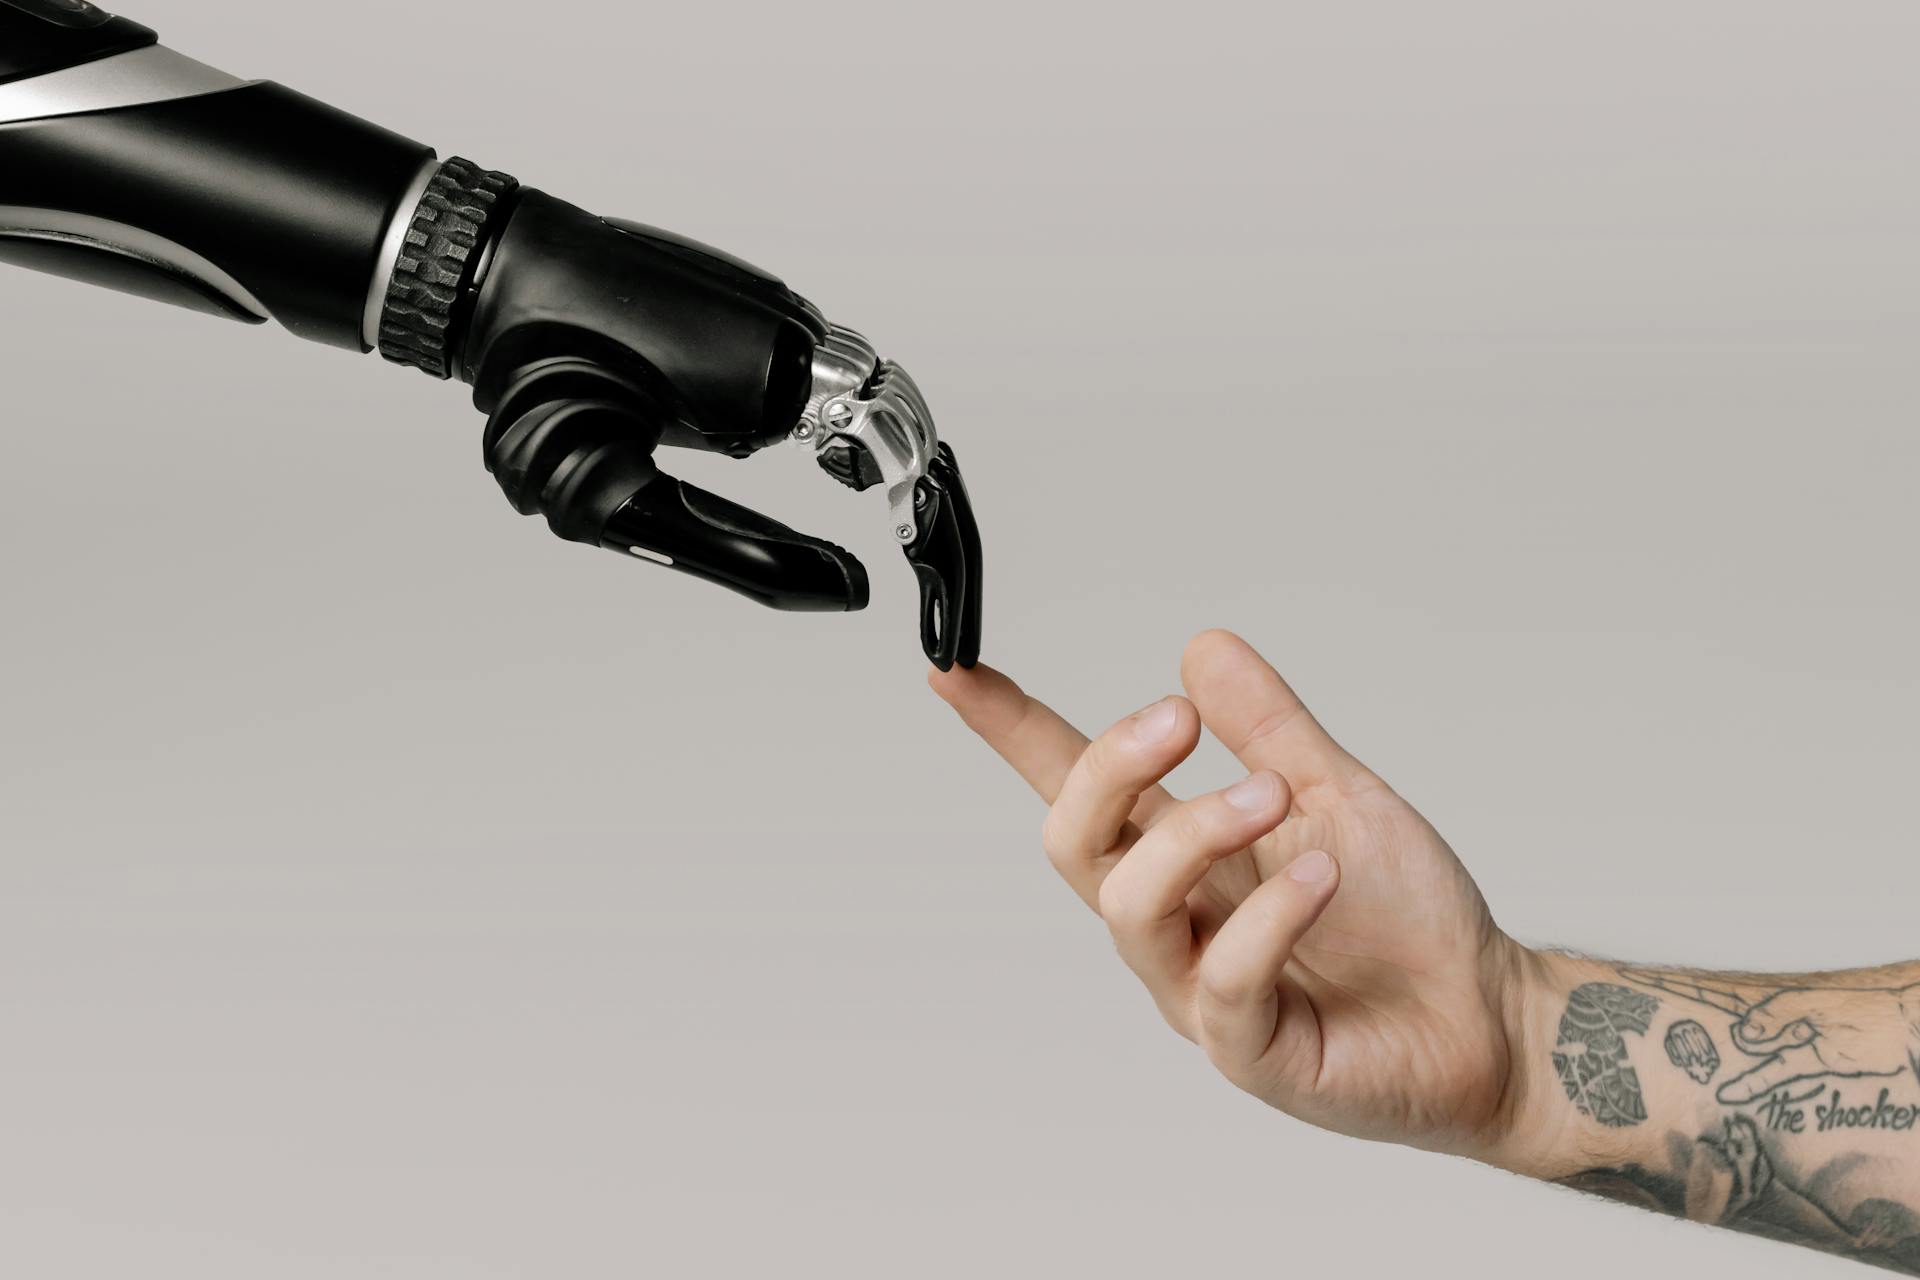 Robotic hand reaches out to touch the hand of a person.